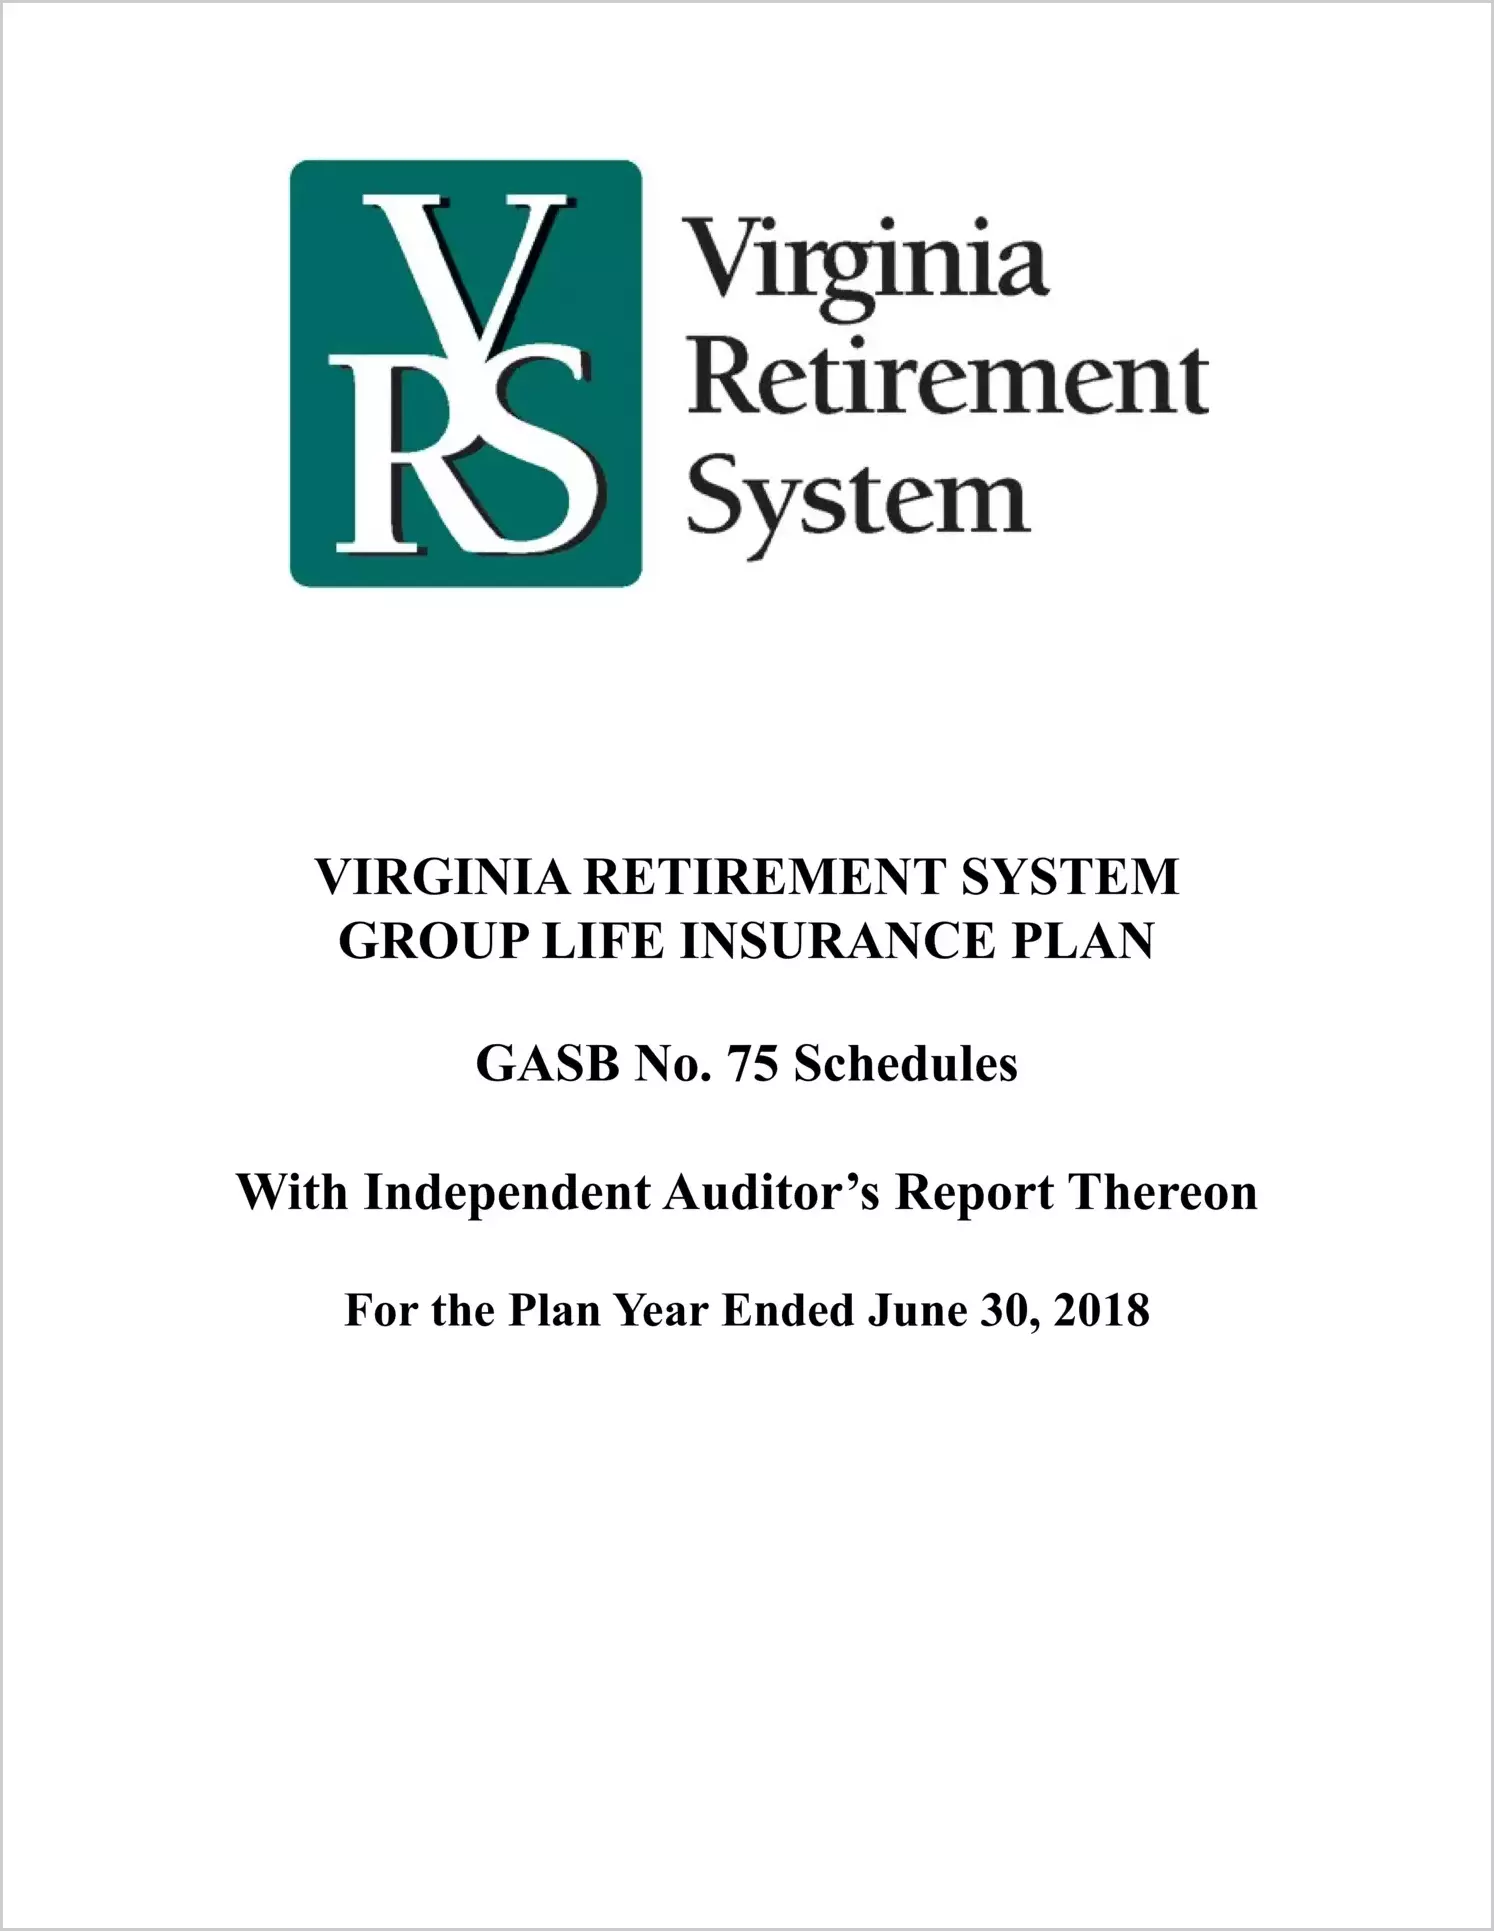 GASB 75 Schedule - Virginia Retirement System Group Life Insurance Plan for the plan year ended June 30, 2018